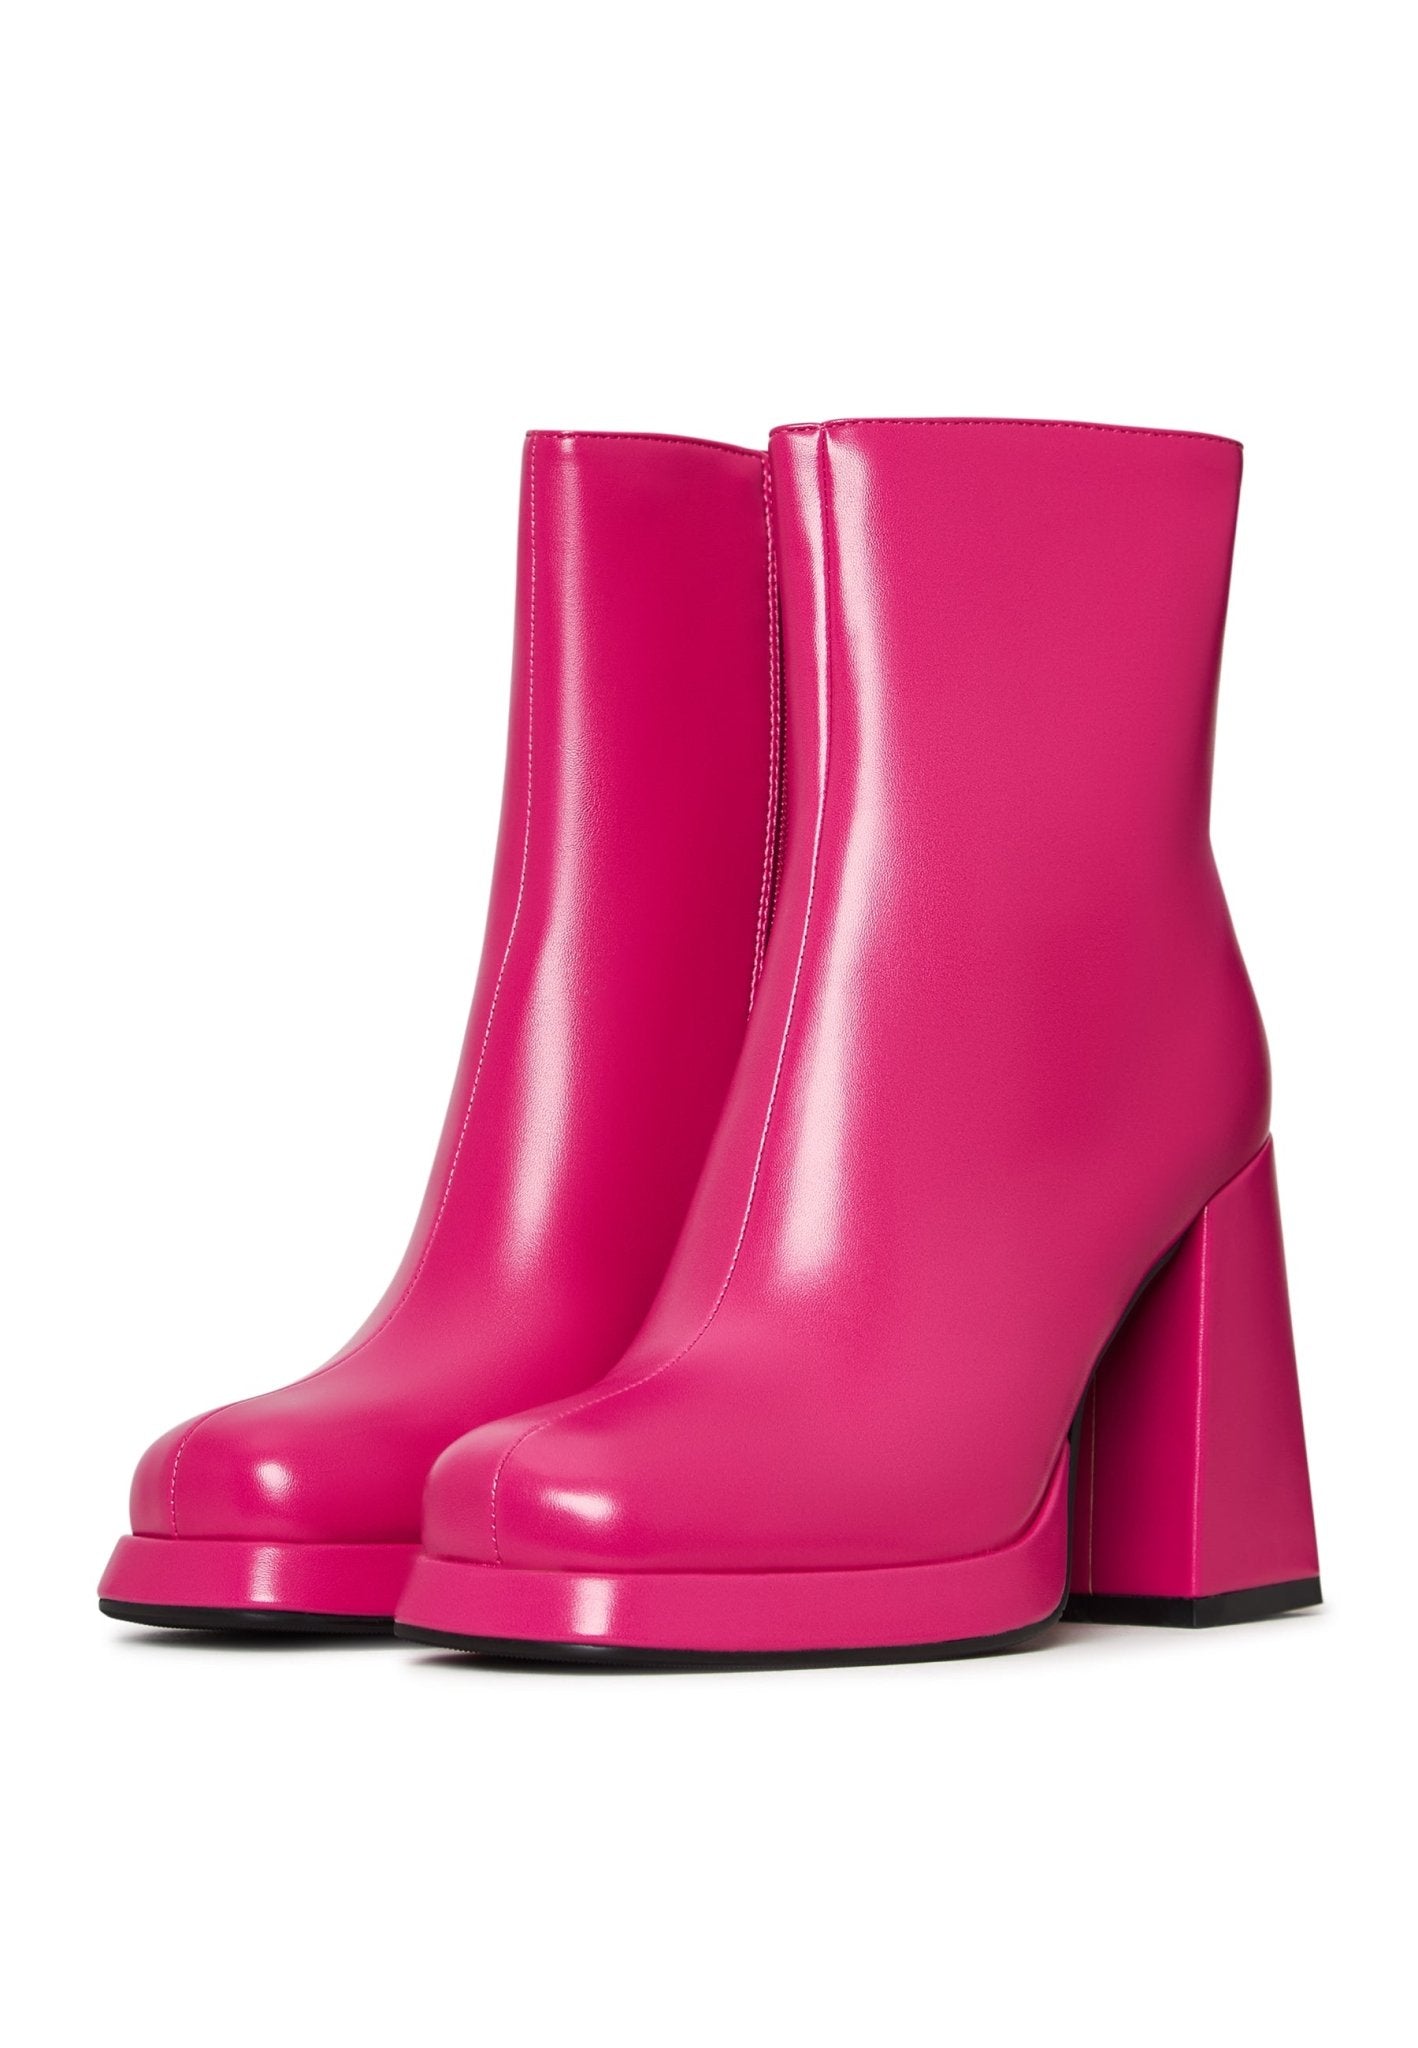 Vegan Leather Stiletto Ankle Boots - Pink – Dolls Kill